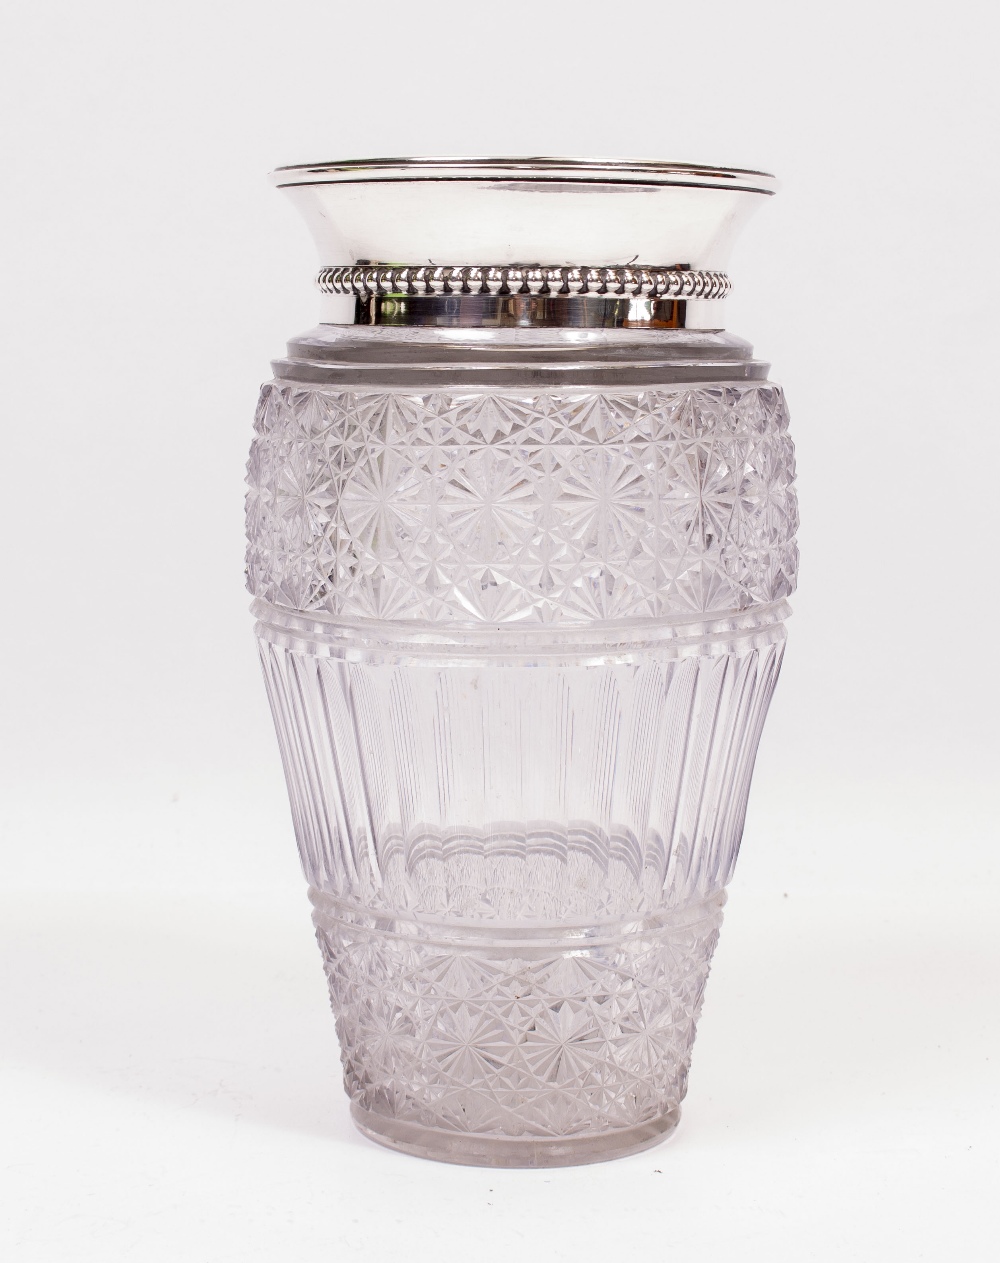 AN EARLY 20TH CENTURY CONTINENTAL CUT GLASS VASE with a white metal rim, 32cm in height